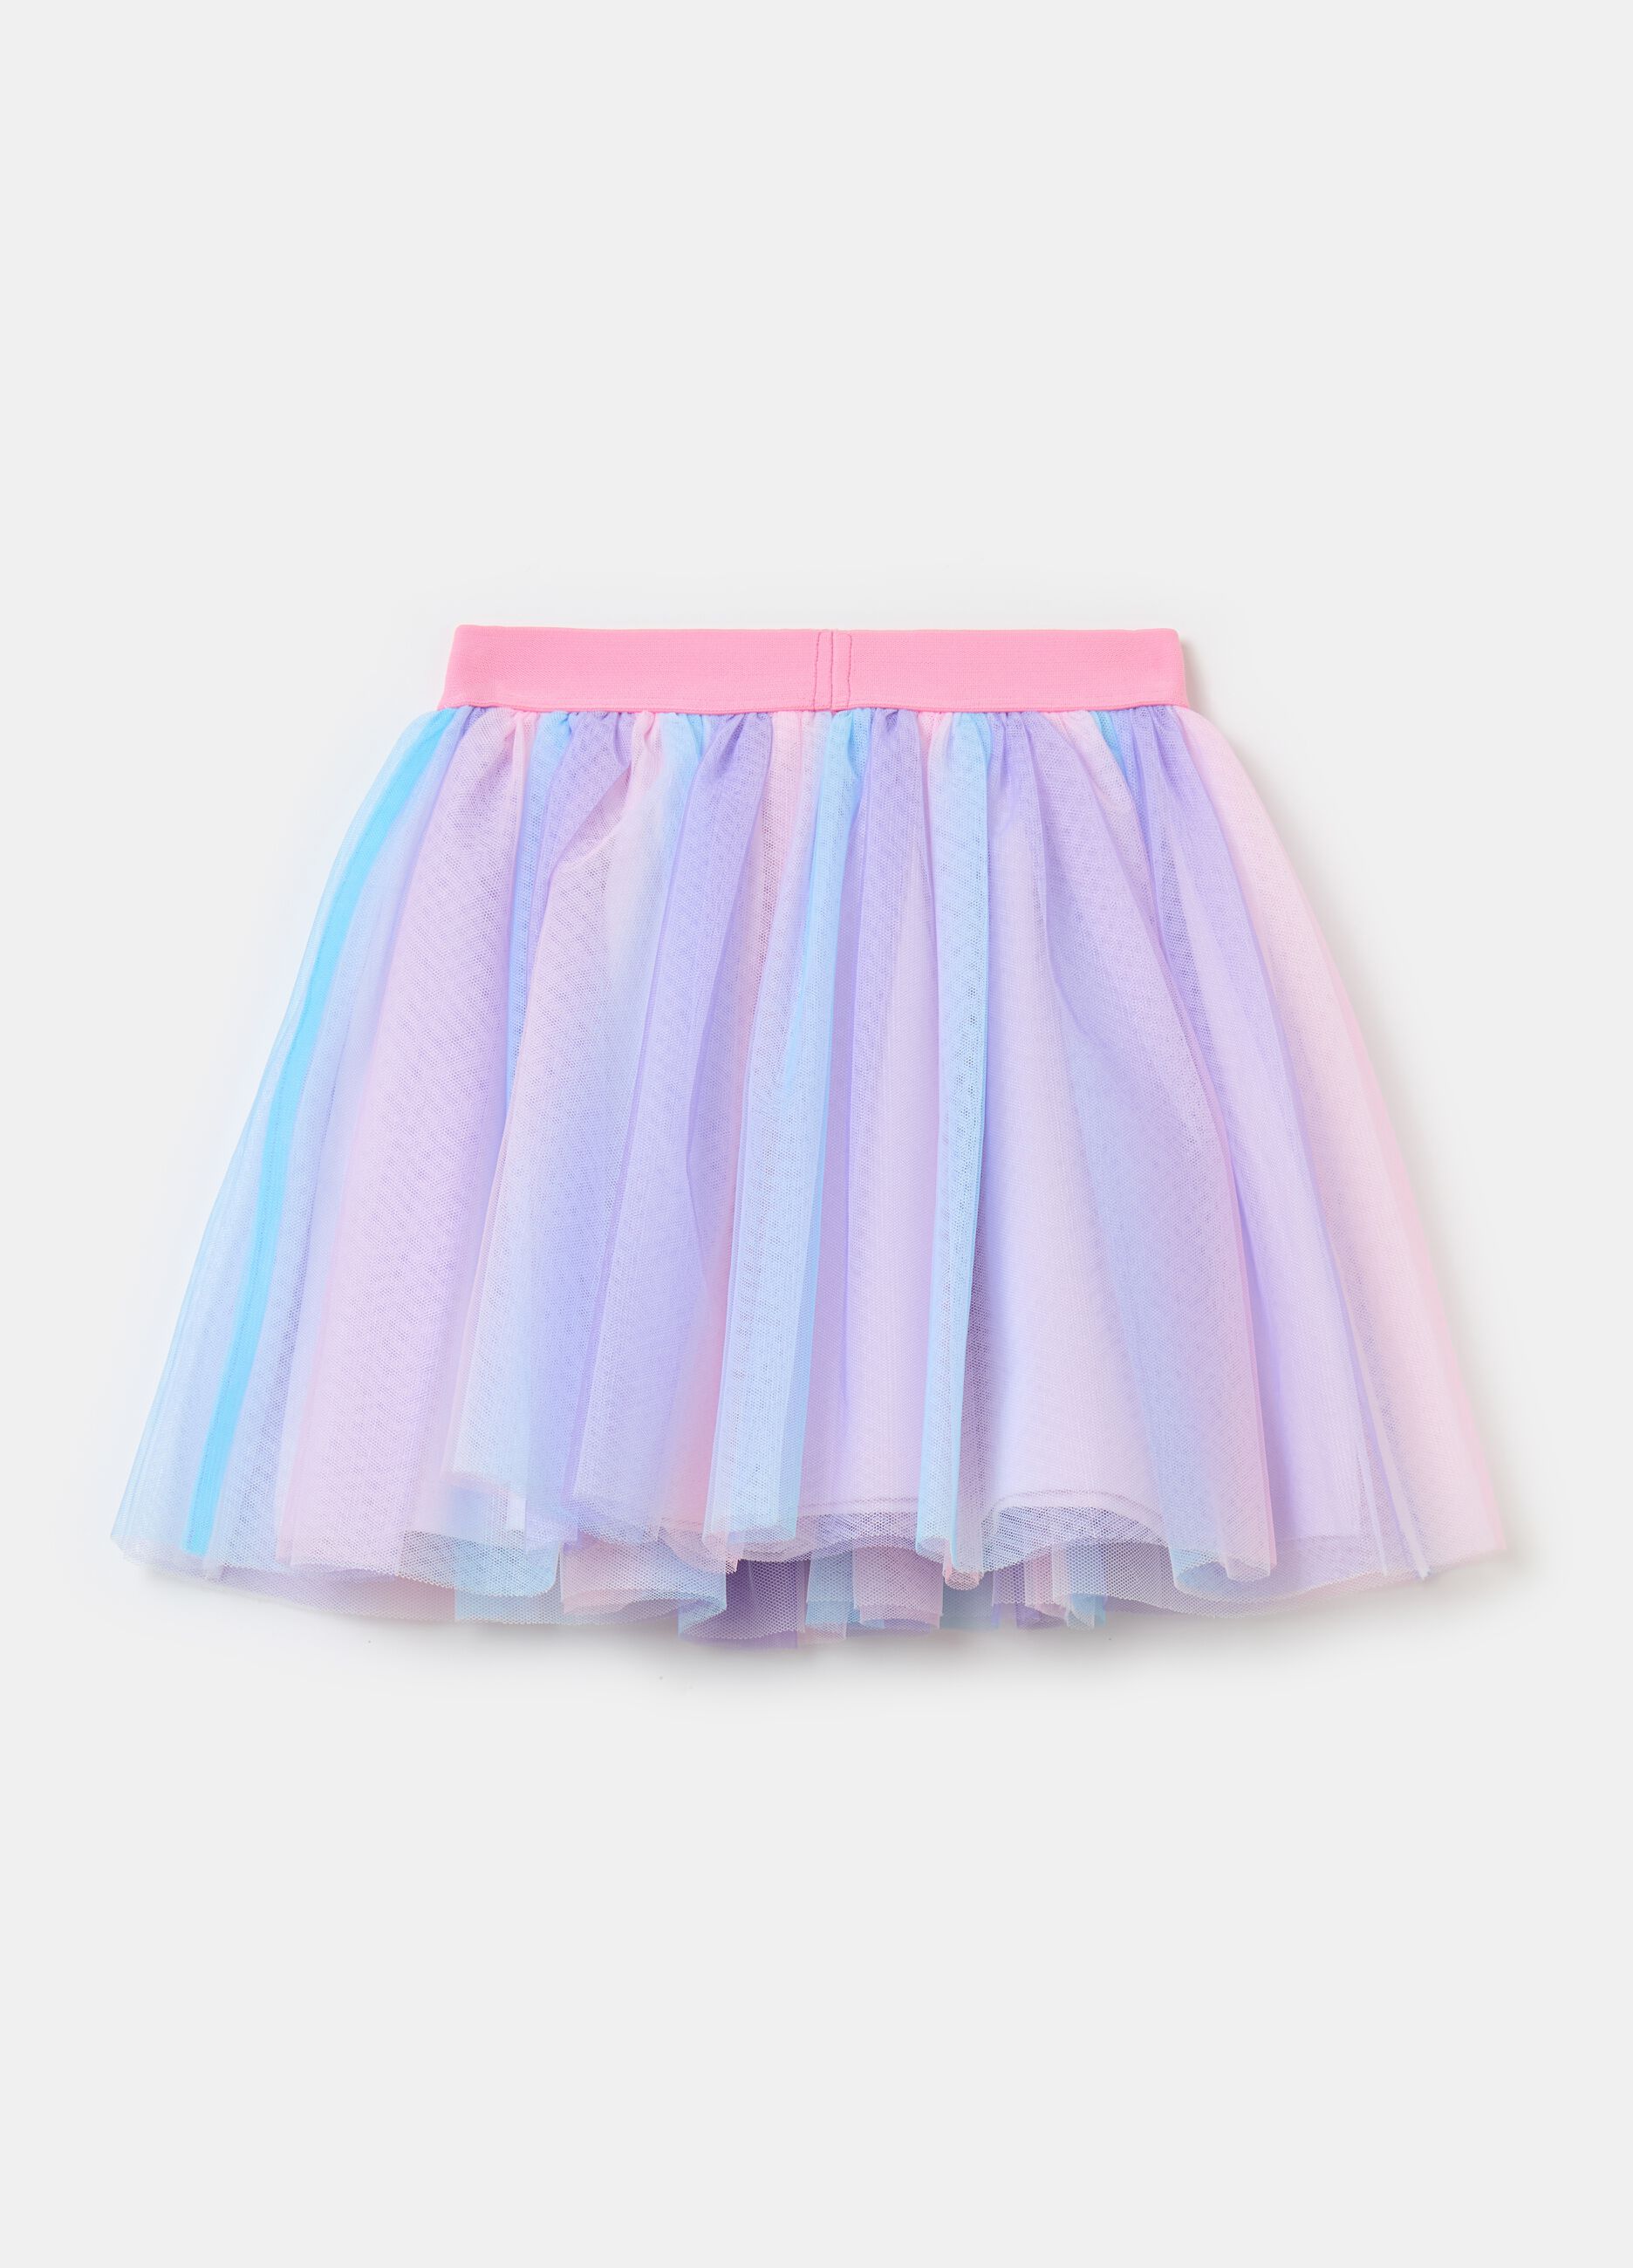 Tulle skirt with dip-dye pattern